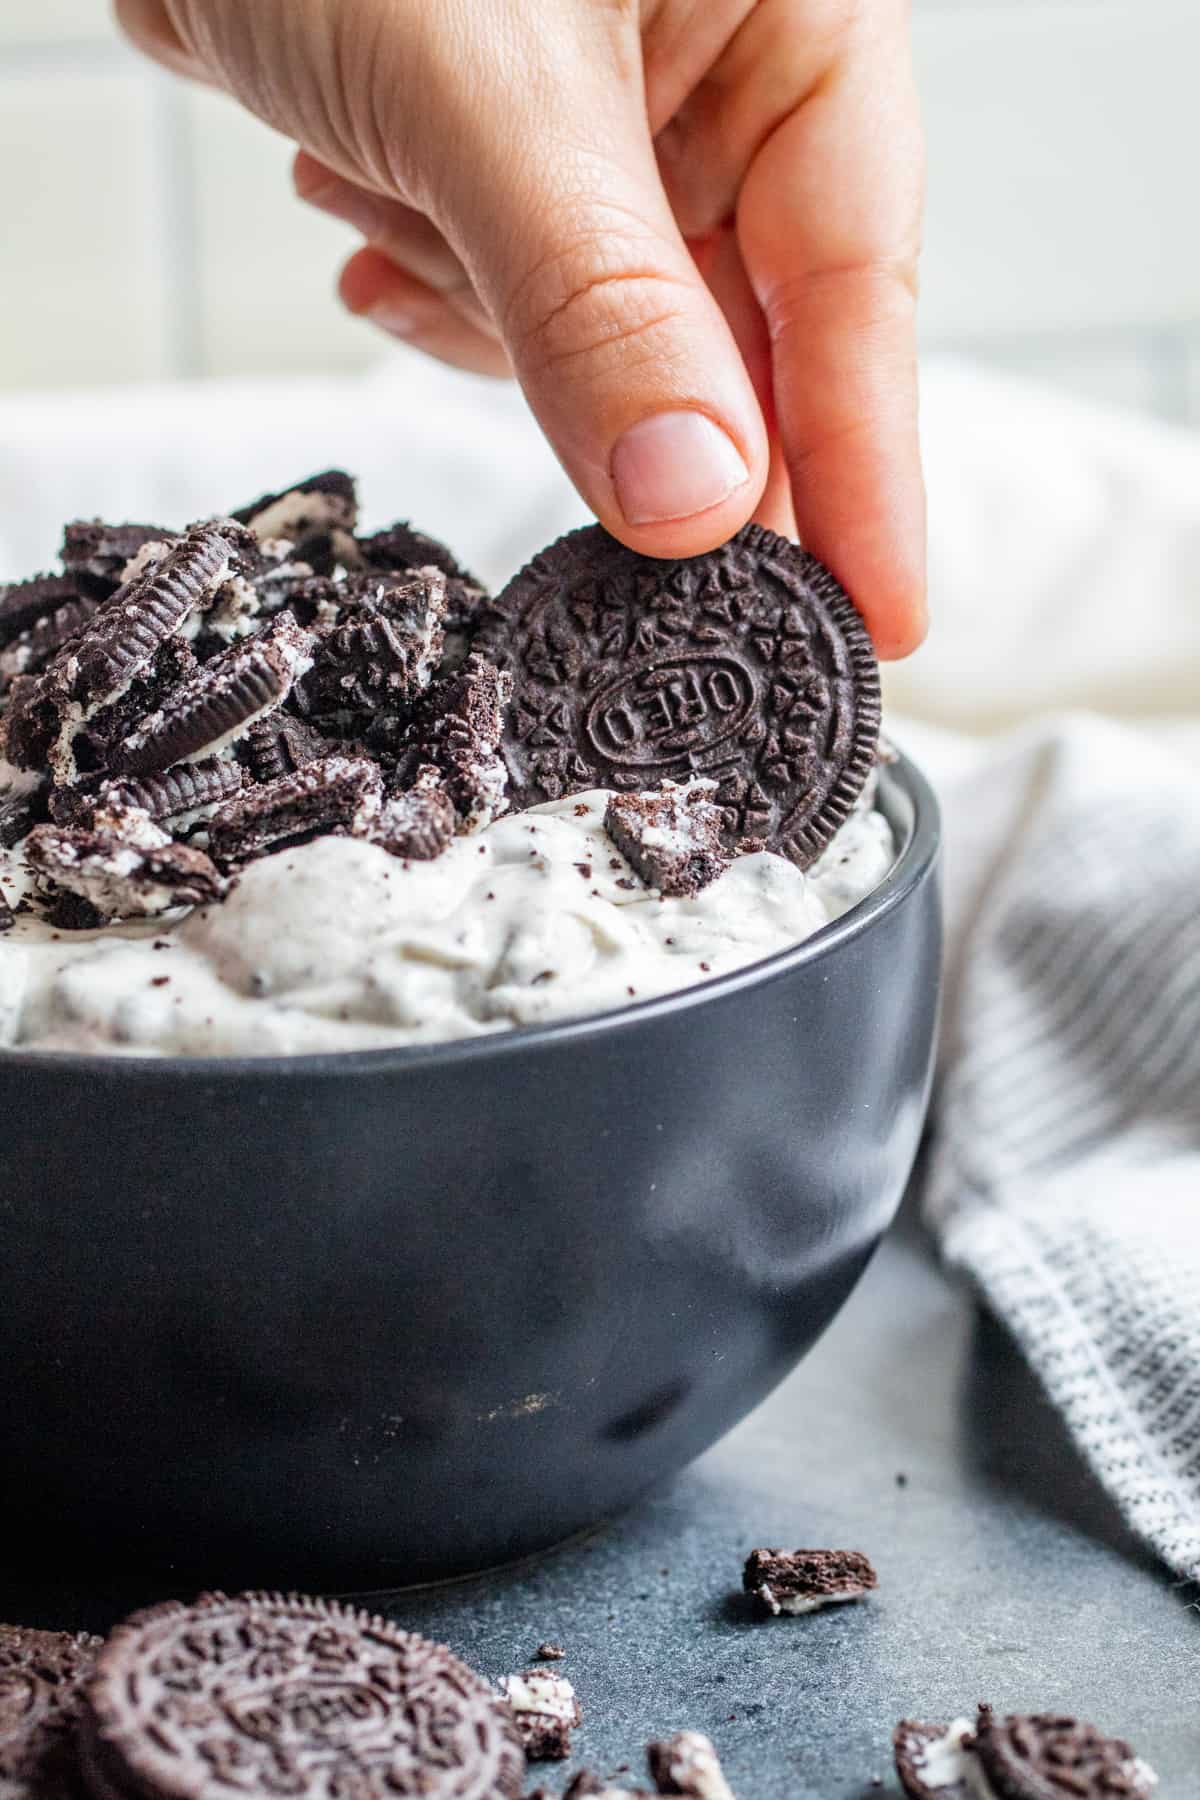 Hand dipping oreo cookie into dip.